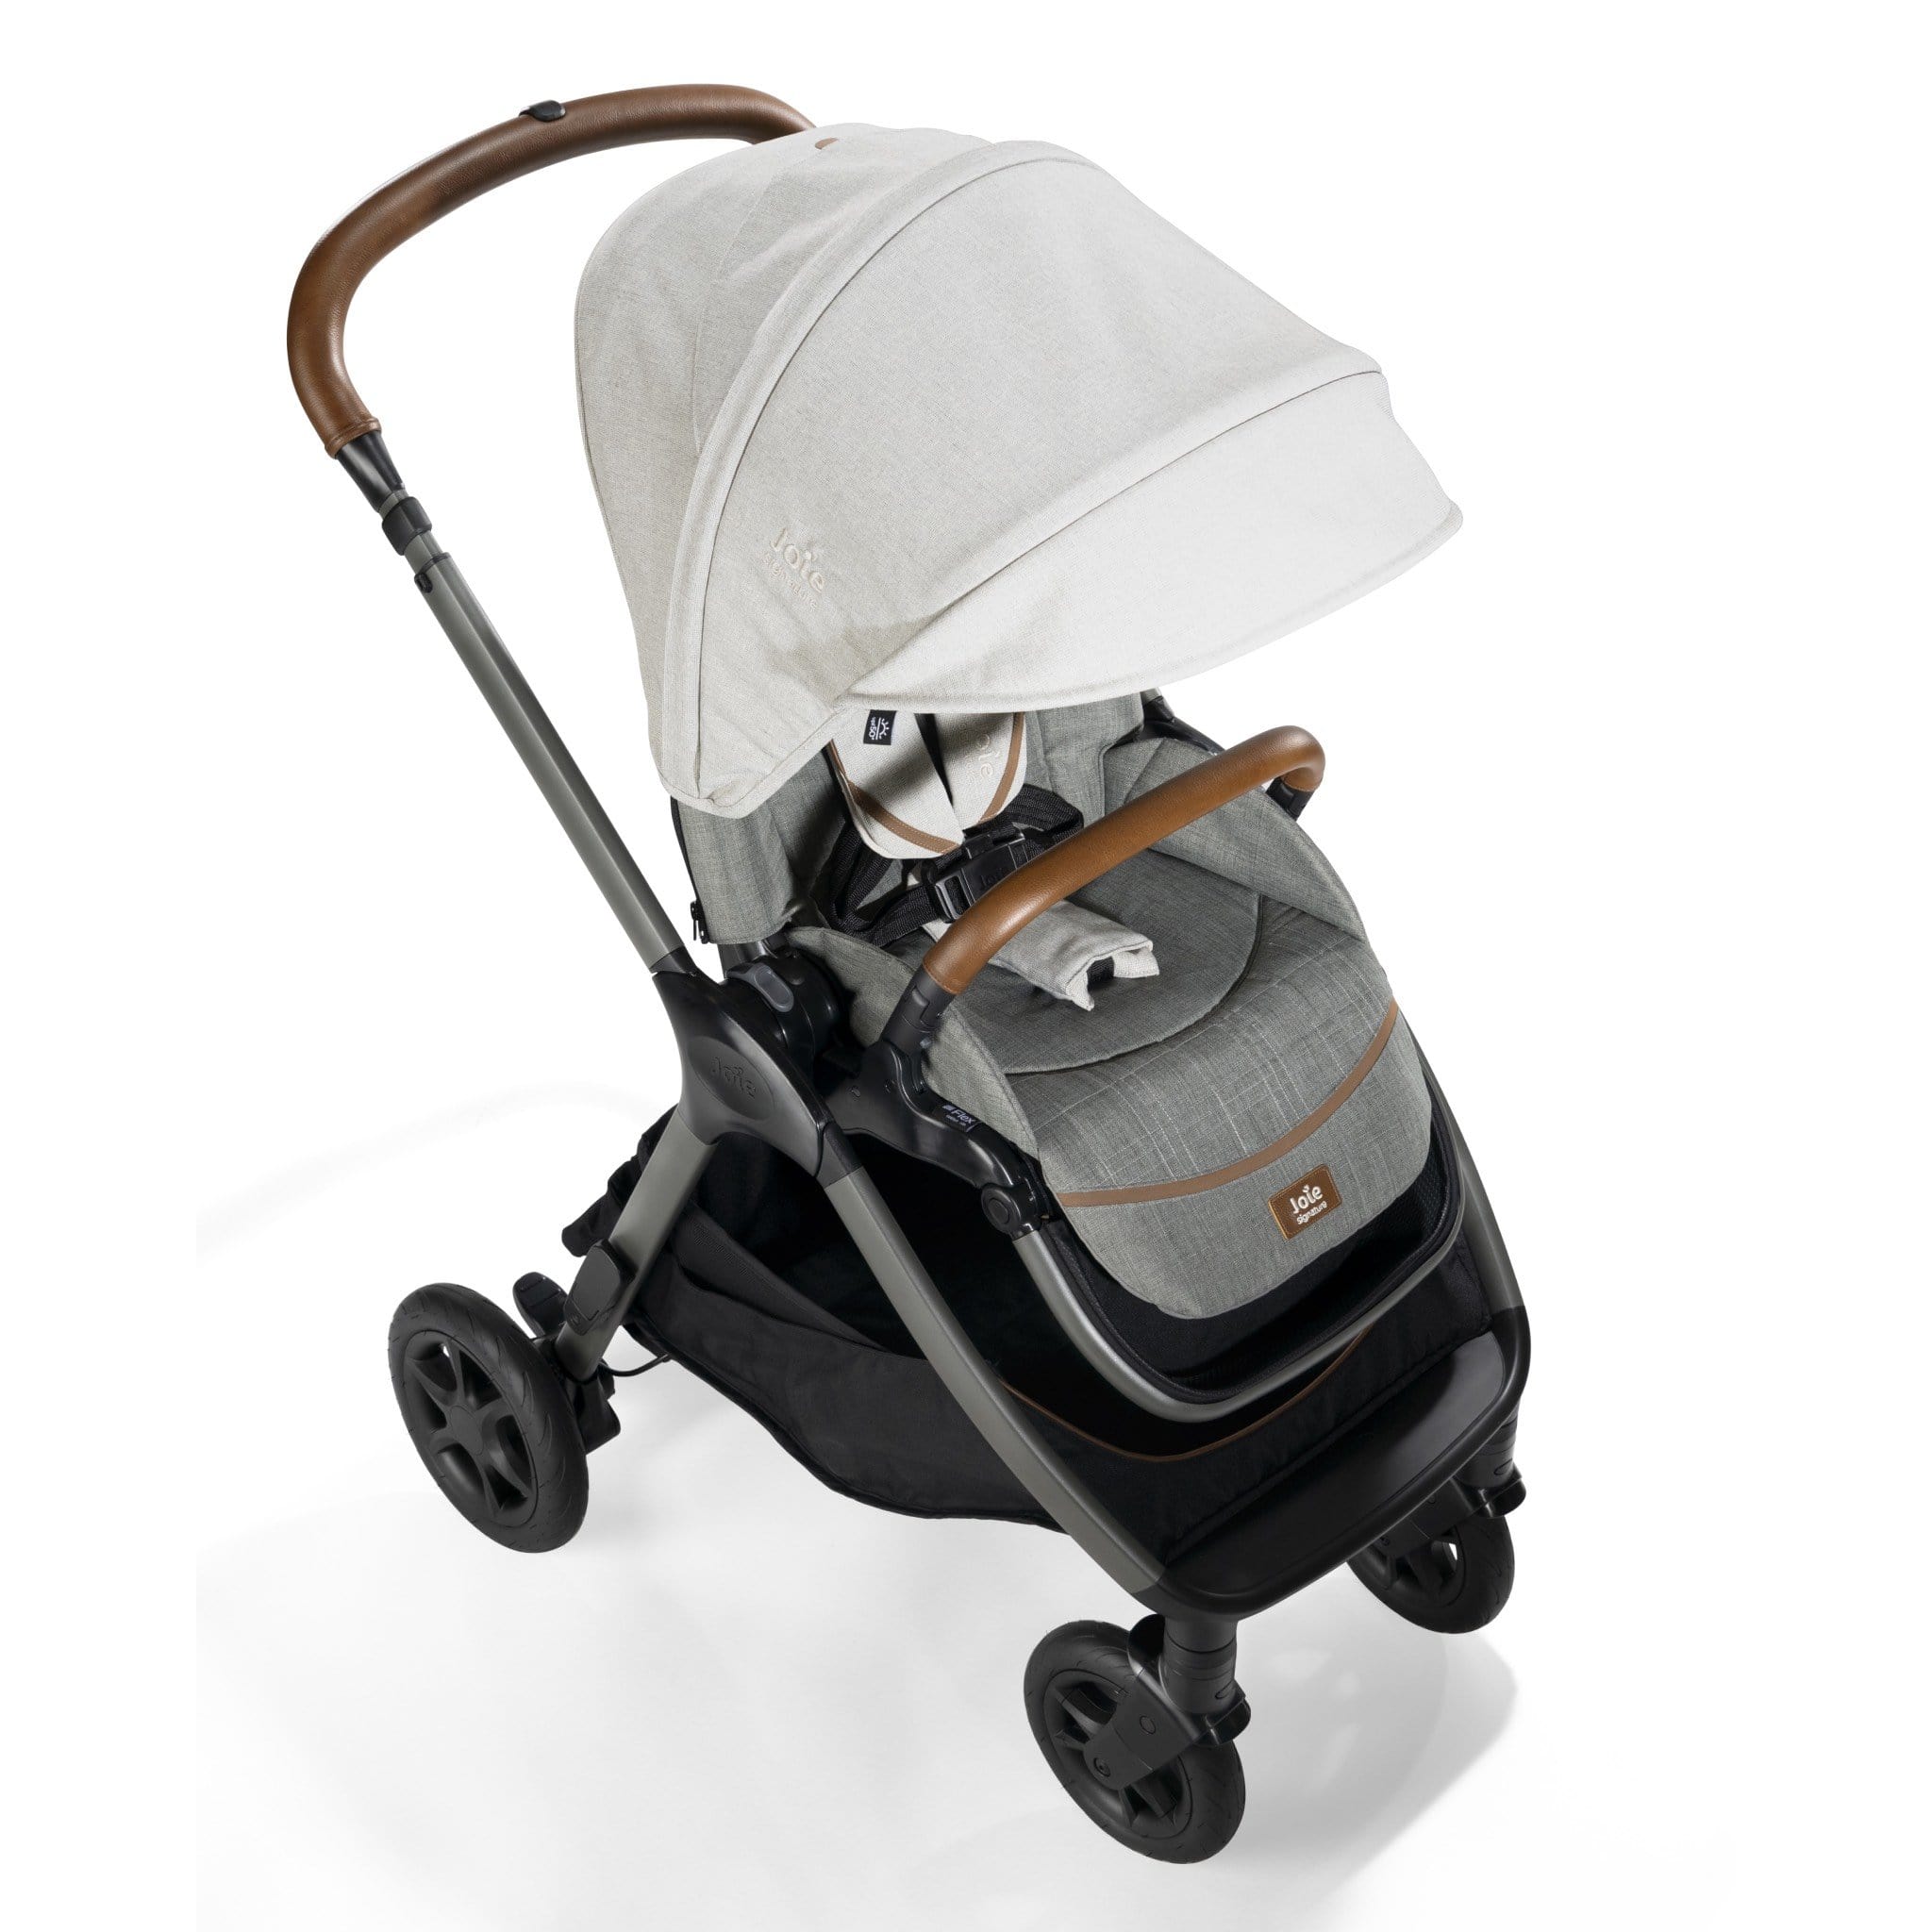 Joie baby prams Joie Finiti 4in1 Signature Edition Pushchair & Carrycot Oyster 9301-OYS